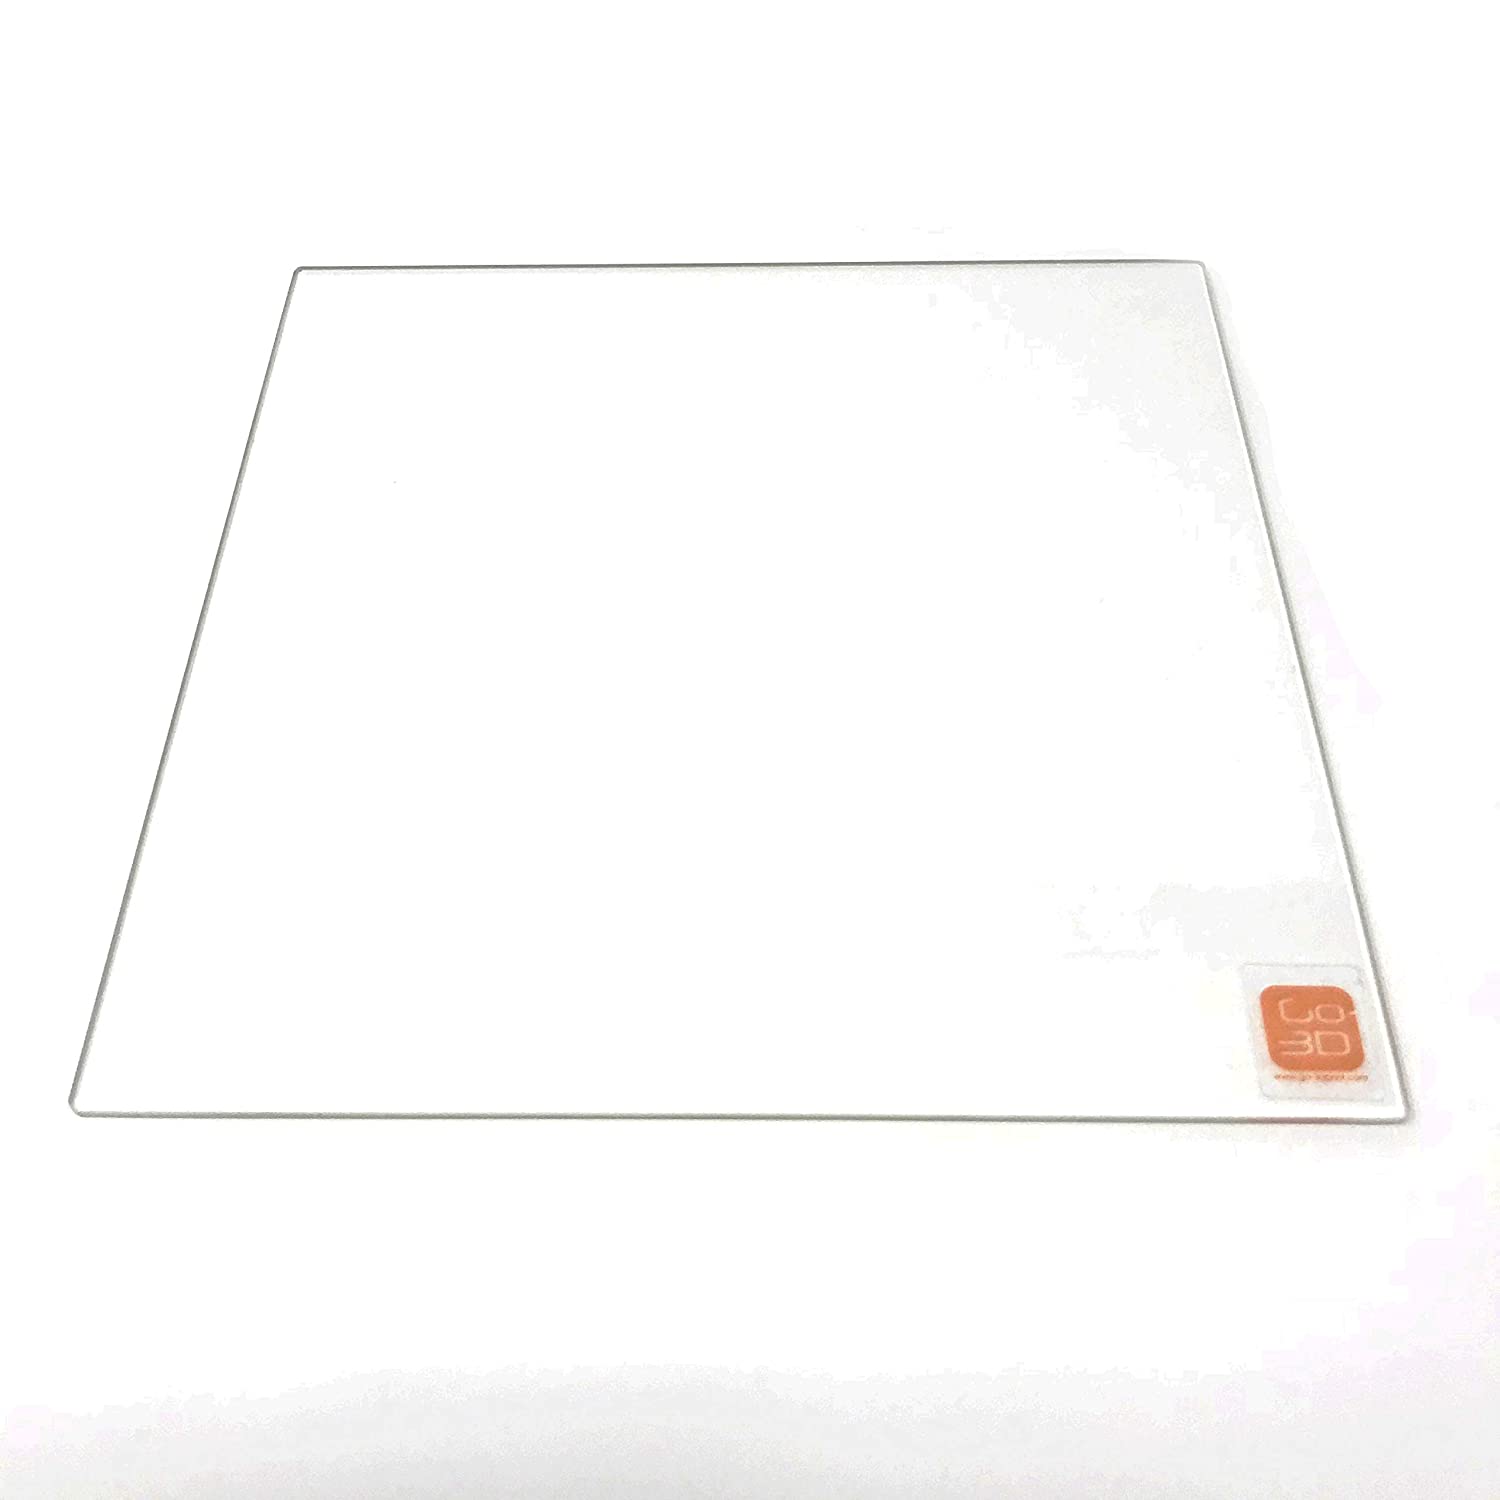 Creality Mirror CR-10 S4 - Glass Mirror Bed for 400x400 3D Printers.